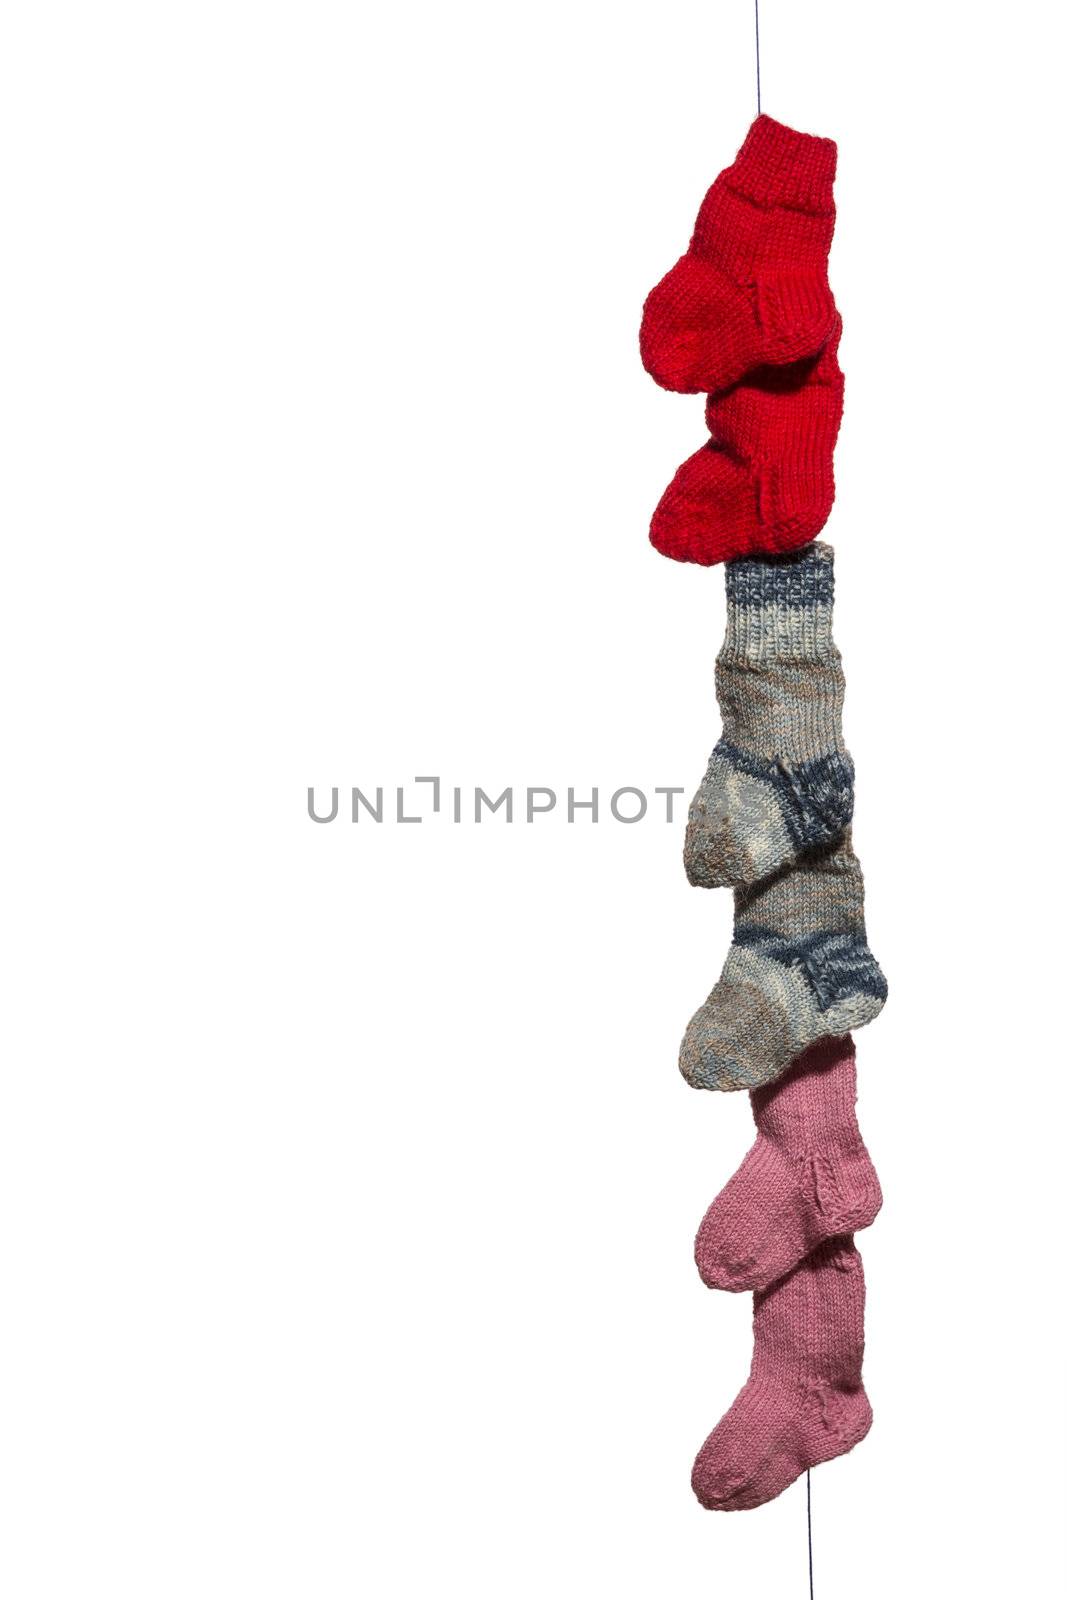 Blue, red, pink and white babysocks on a line in front of a white background